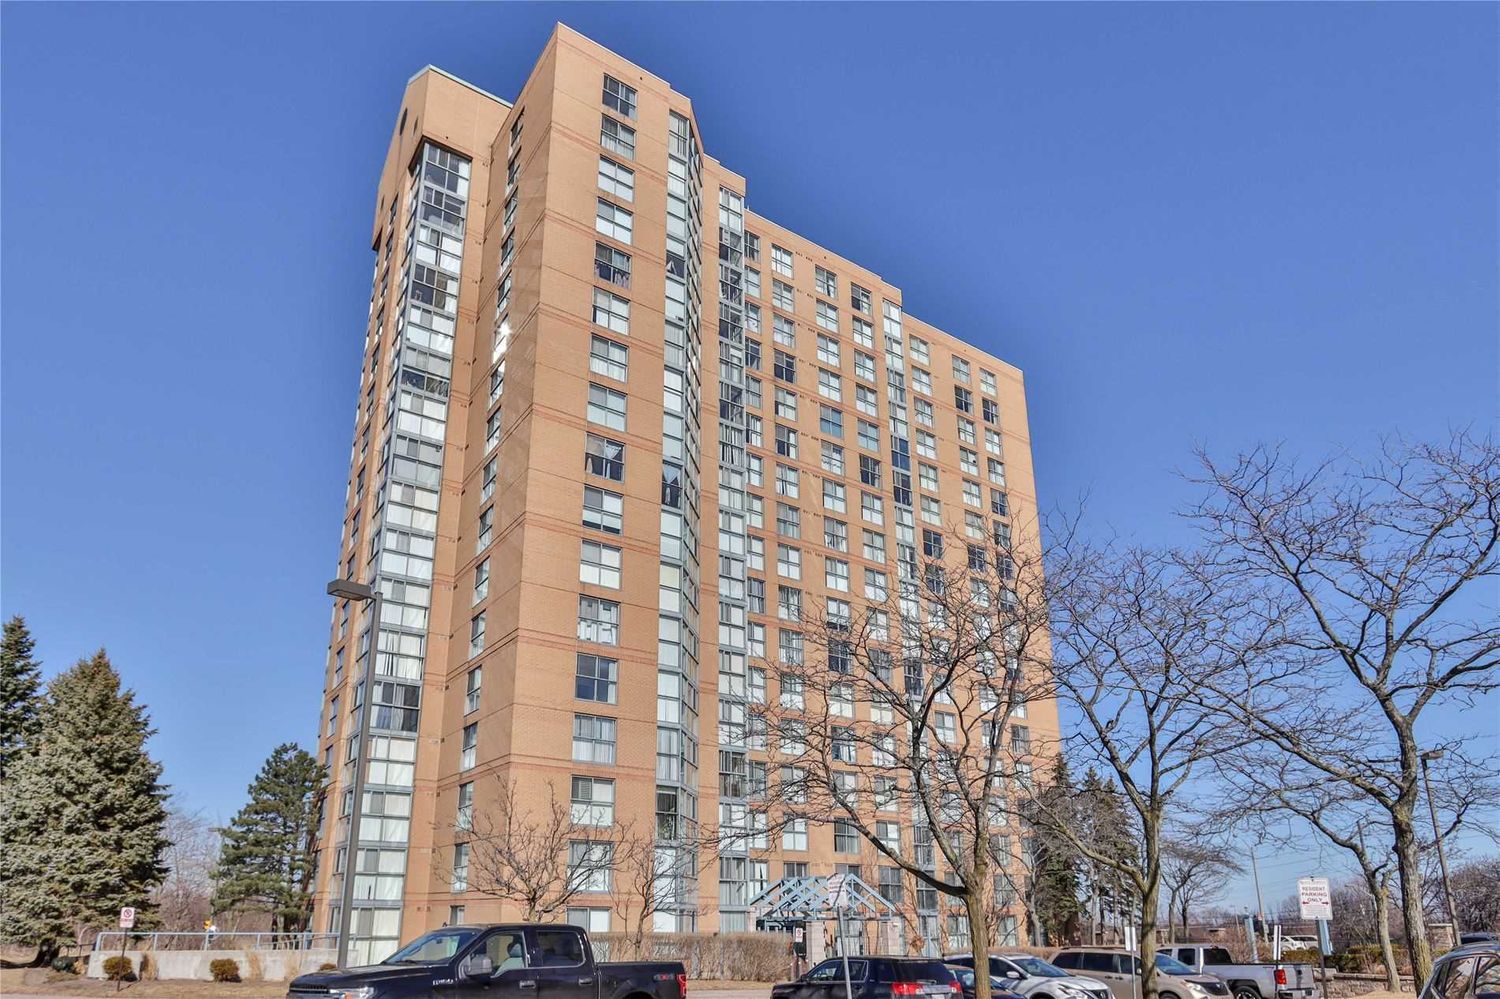 90 Dale Avenue. Prominence Point Condos is located in  Scarborough, Toronto - image #1 of 2